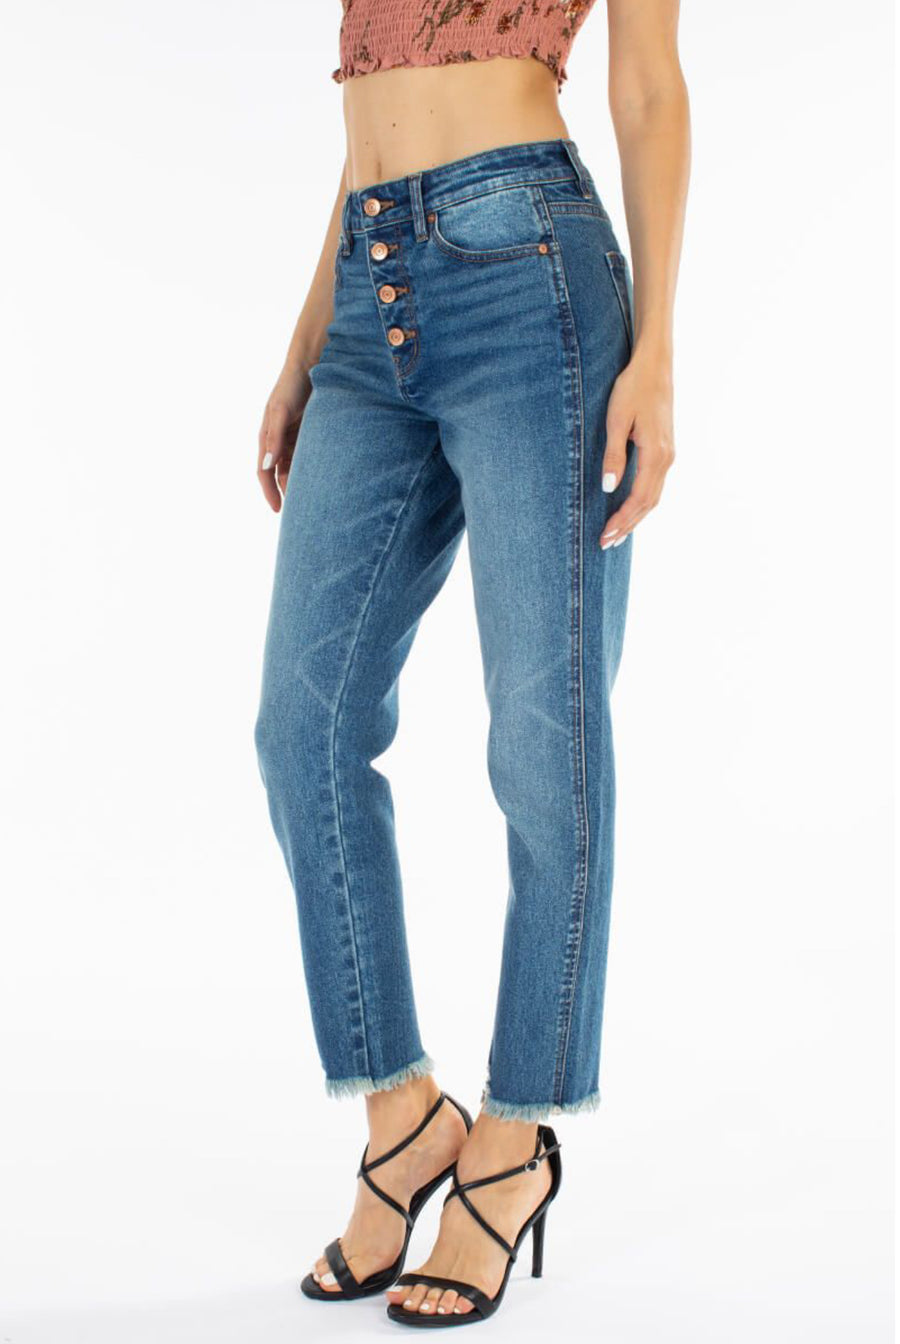 KanCans High Rise Button Fly Mom Jeans 7291M